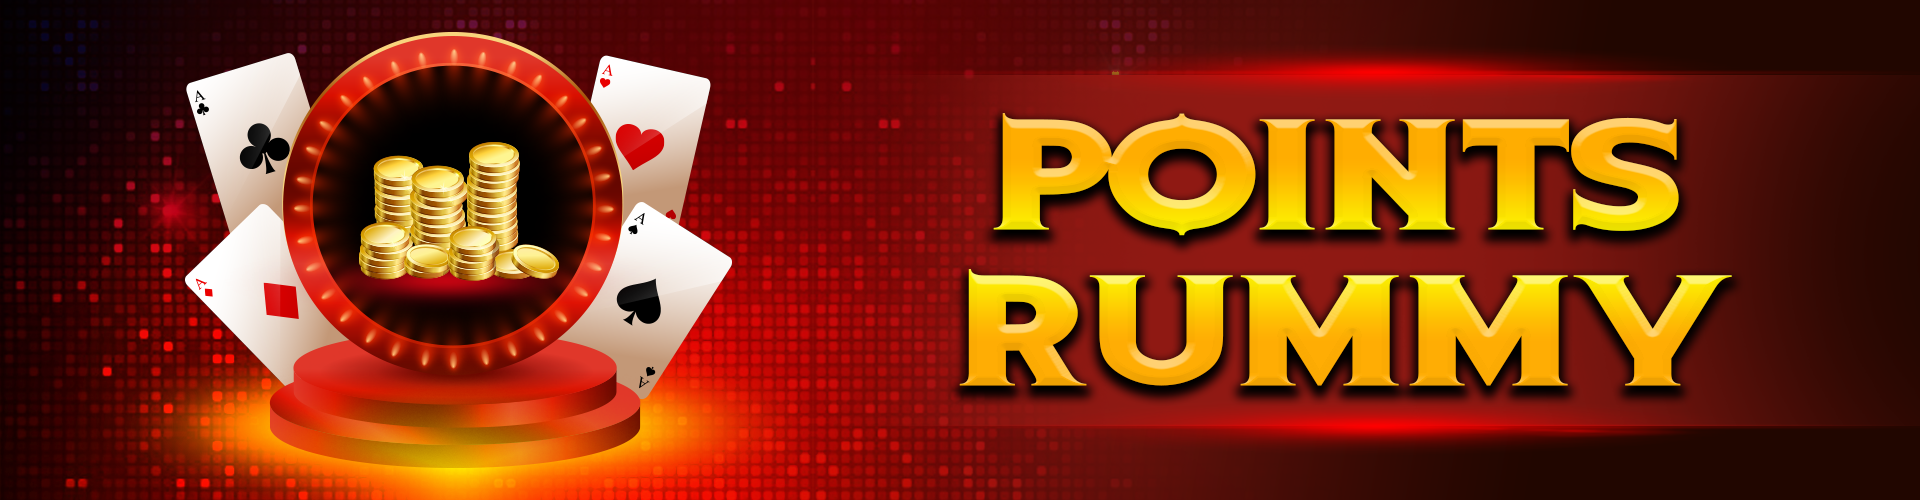 points rummy